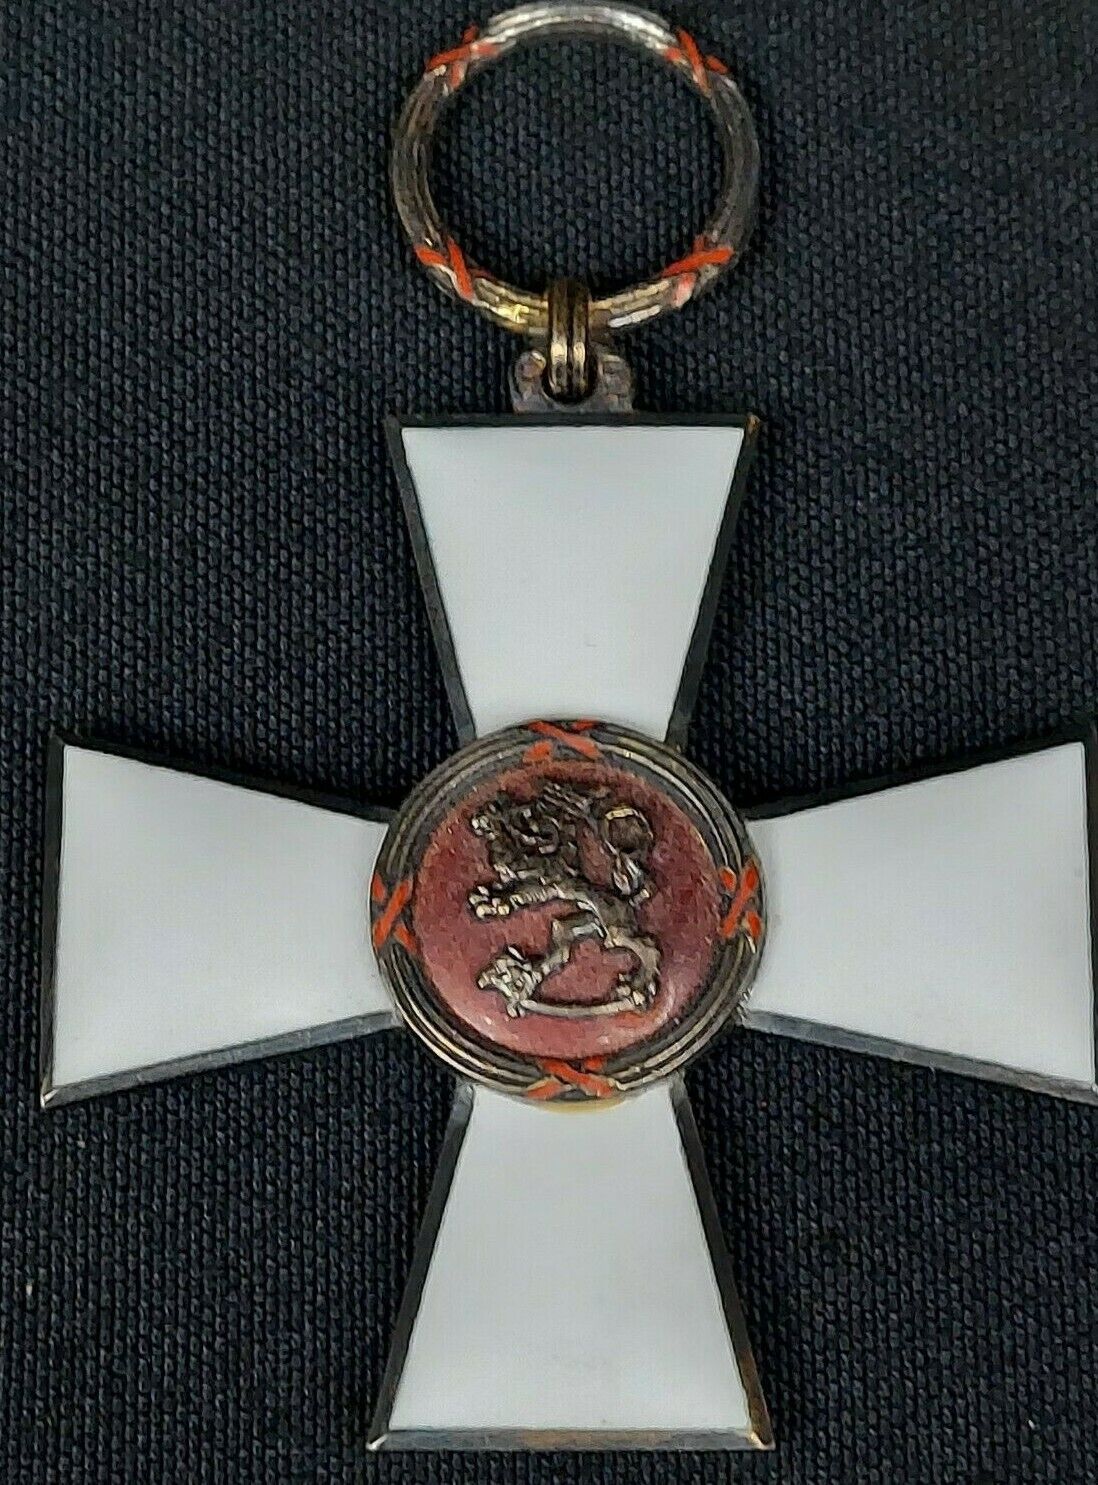 Finland Order of the lion of Finland Medal